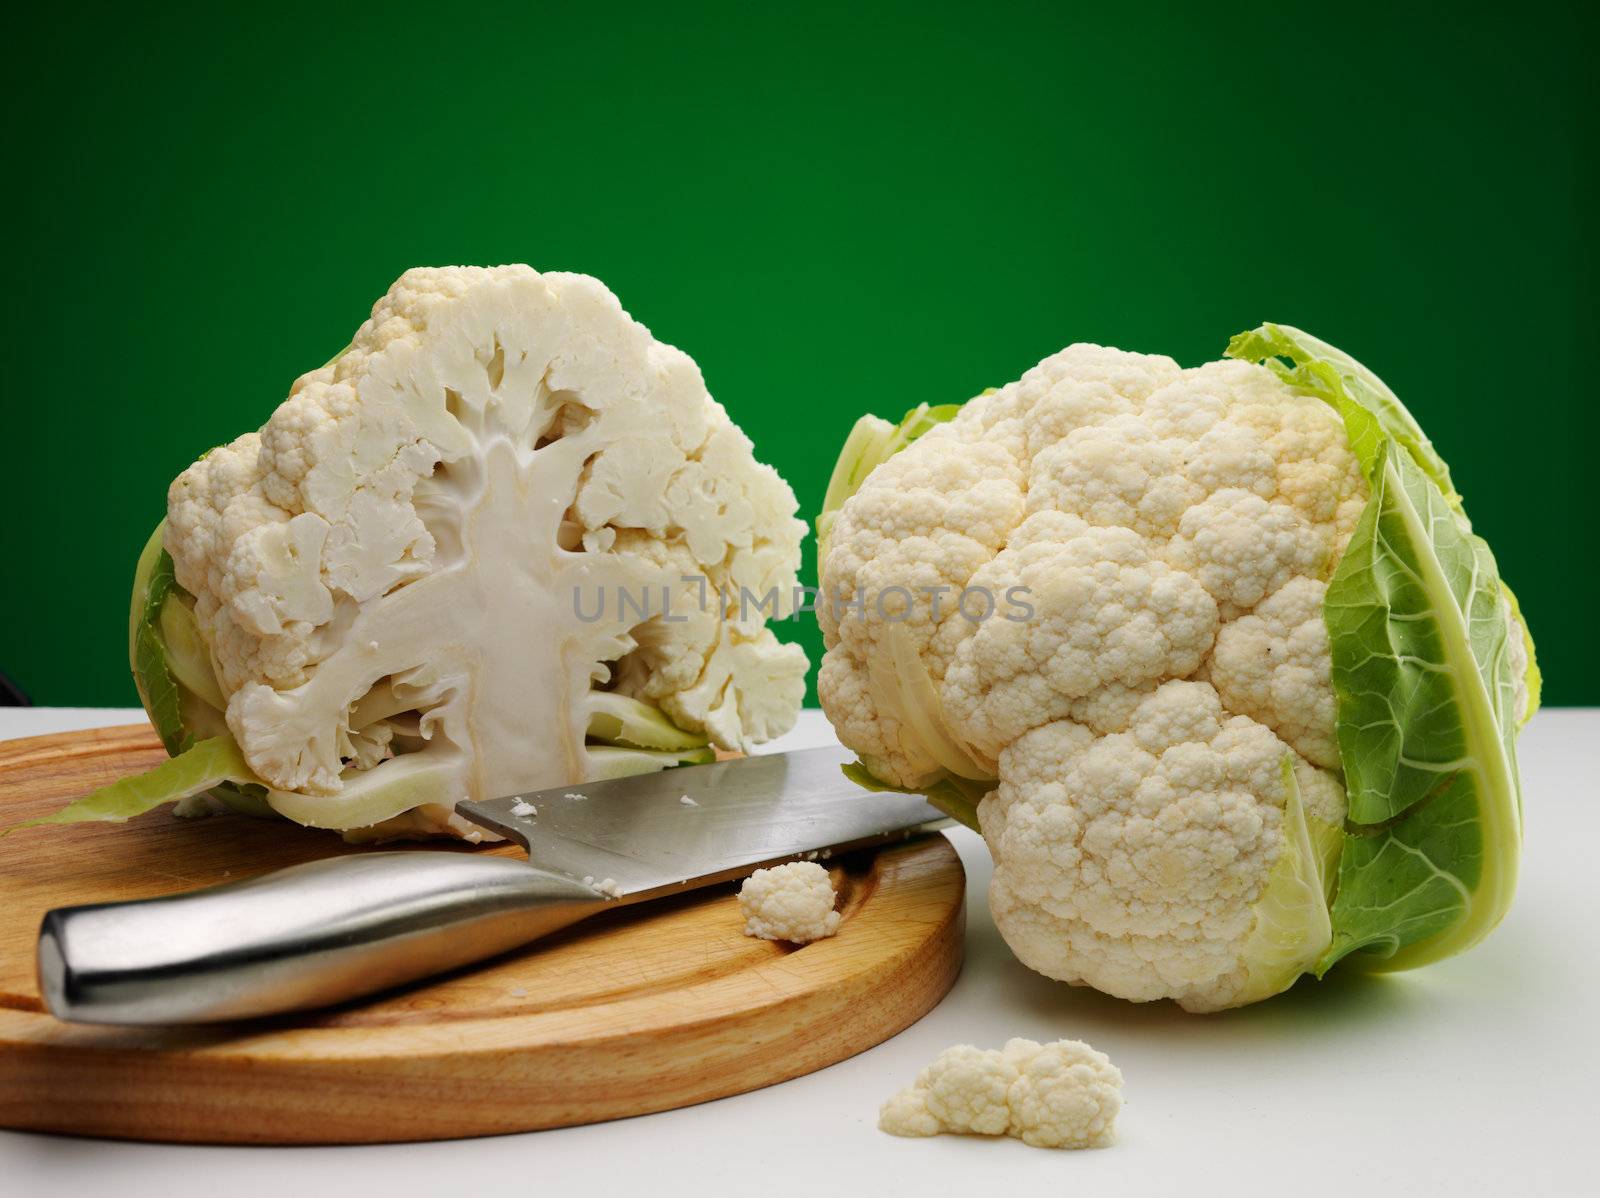 ripe cauliflower on the table over green background